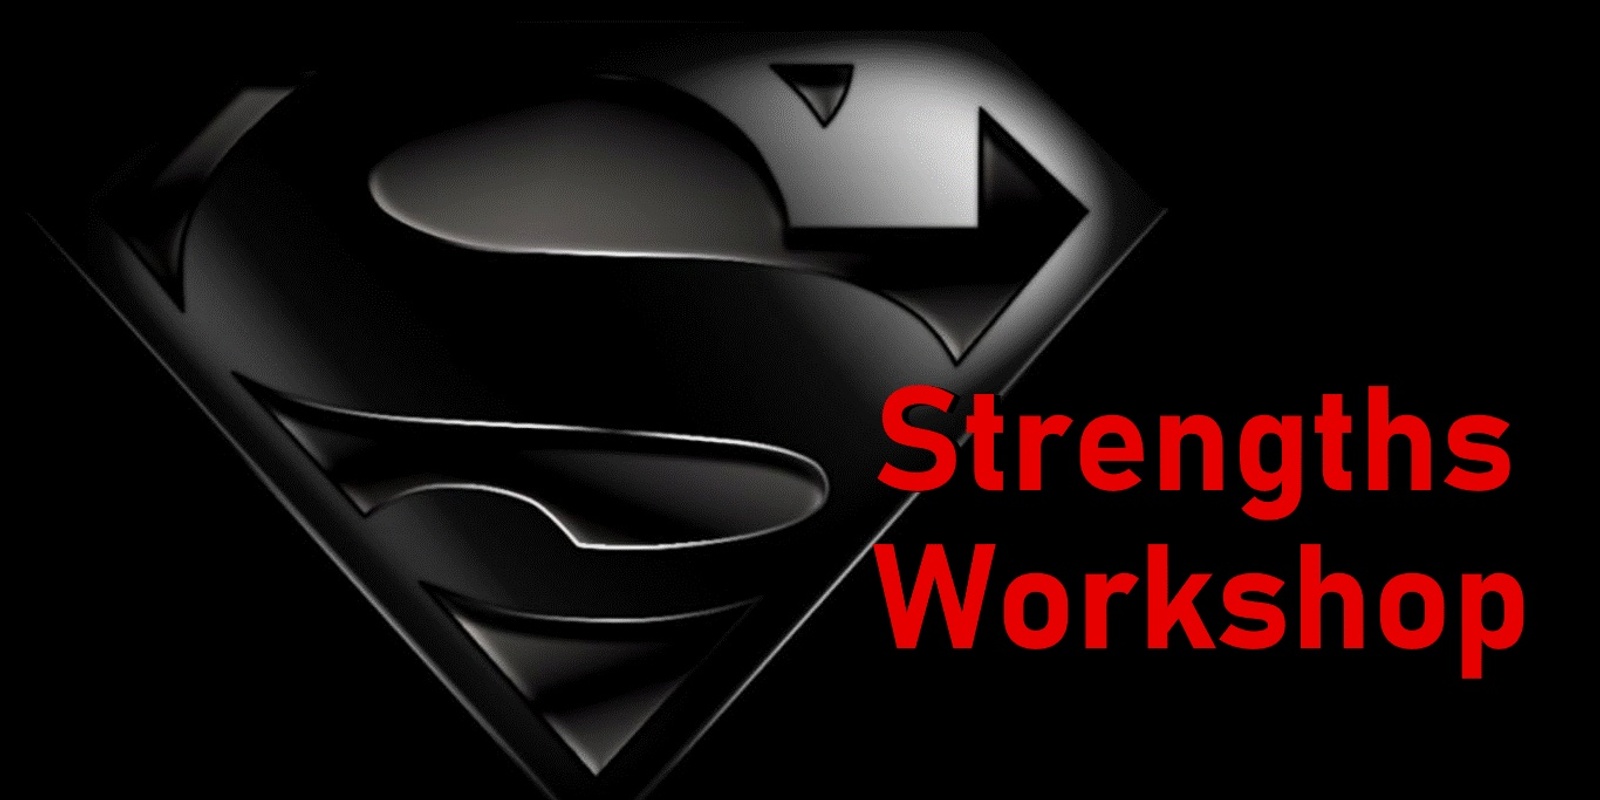 Banner image for Strengths Workshop: Reveal Your Superpowers!